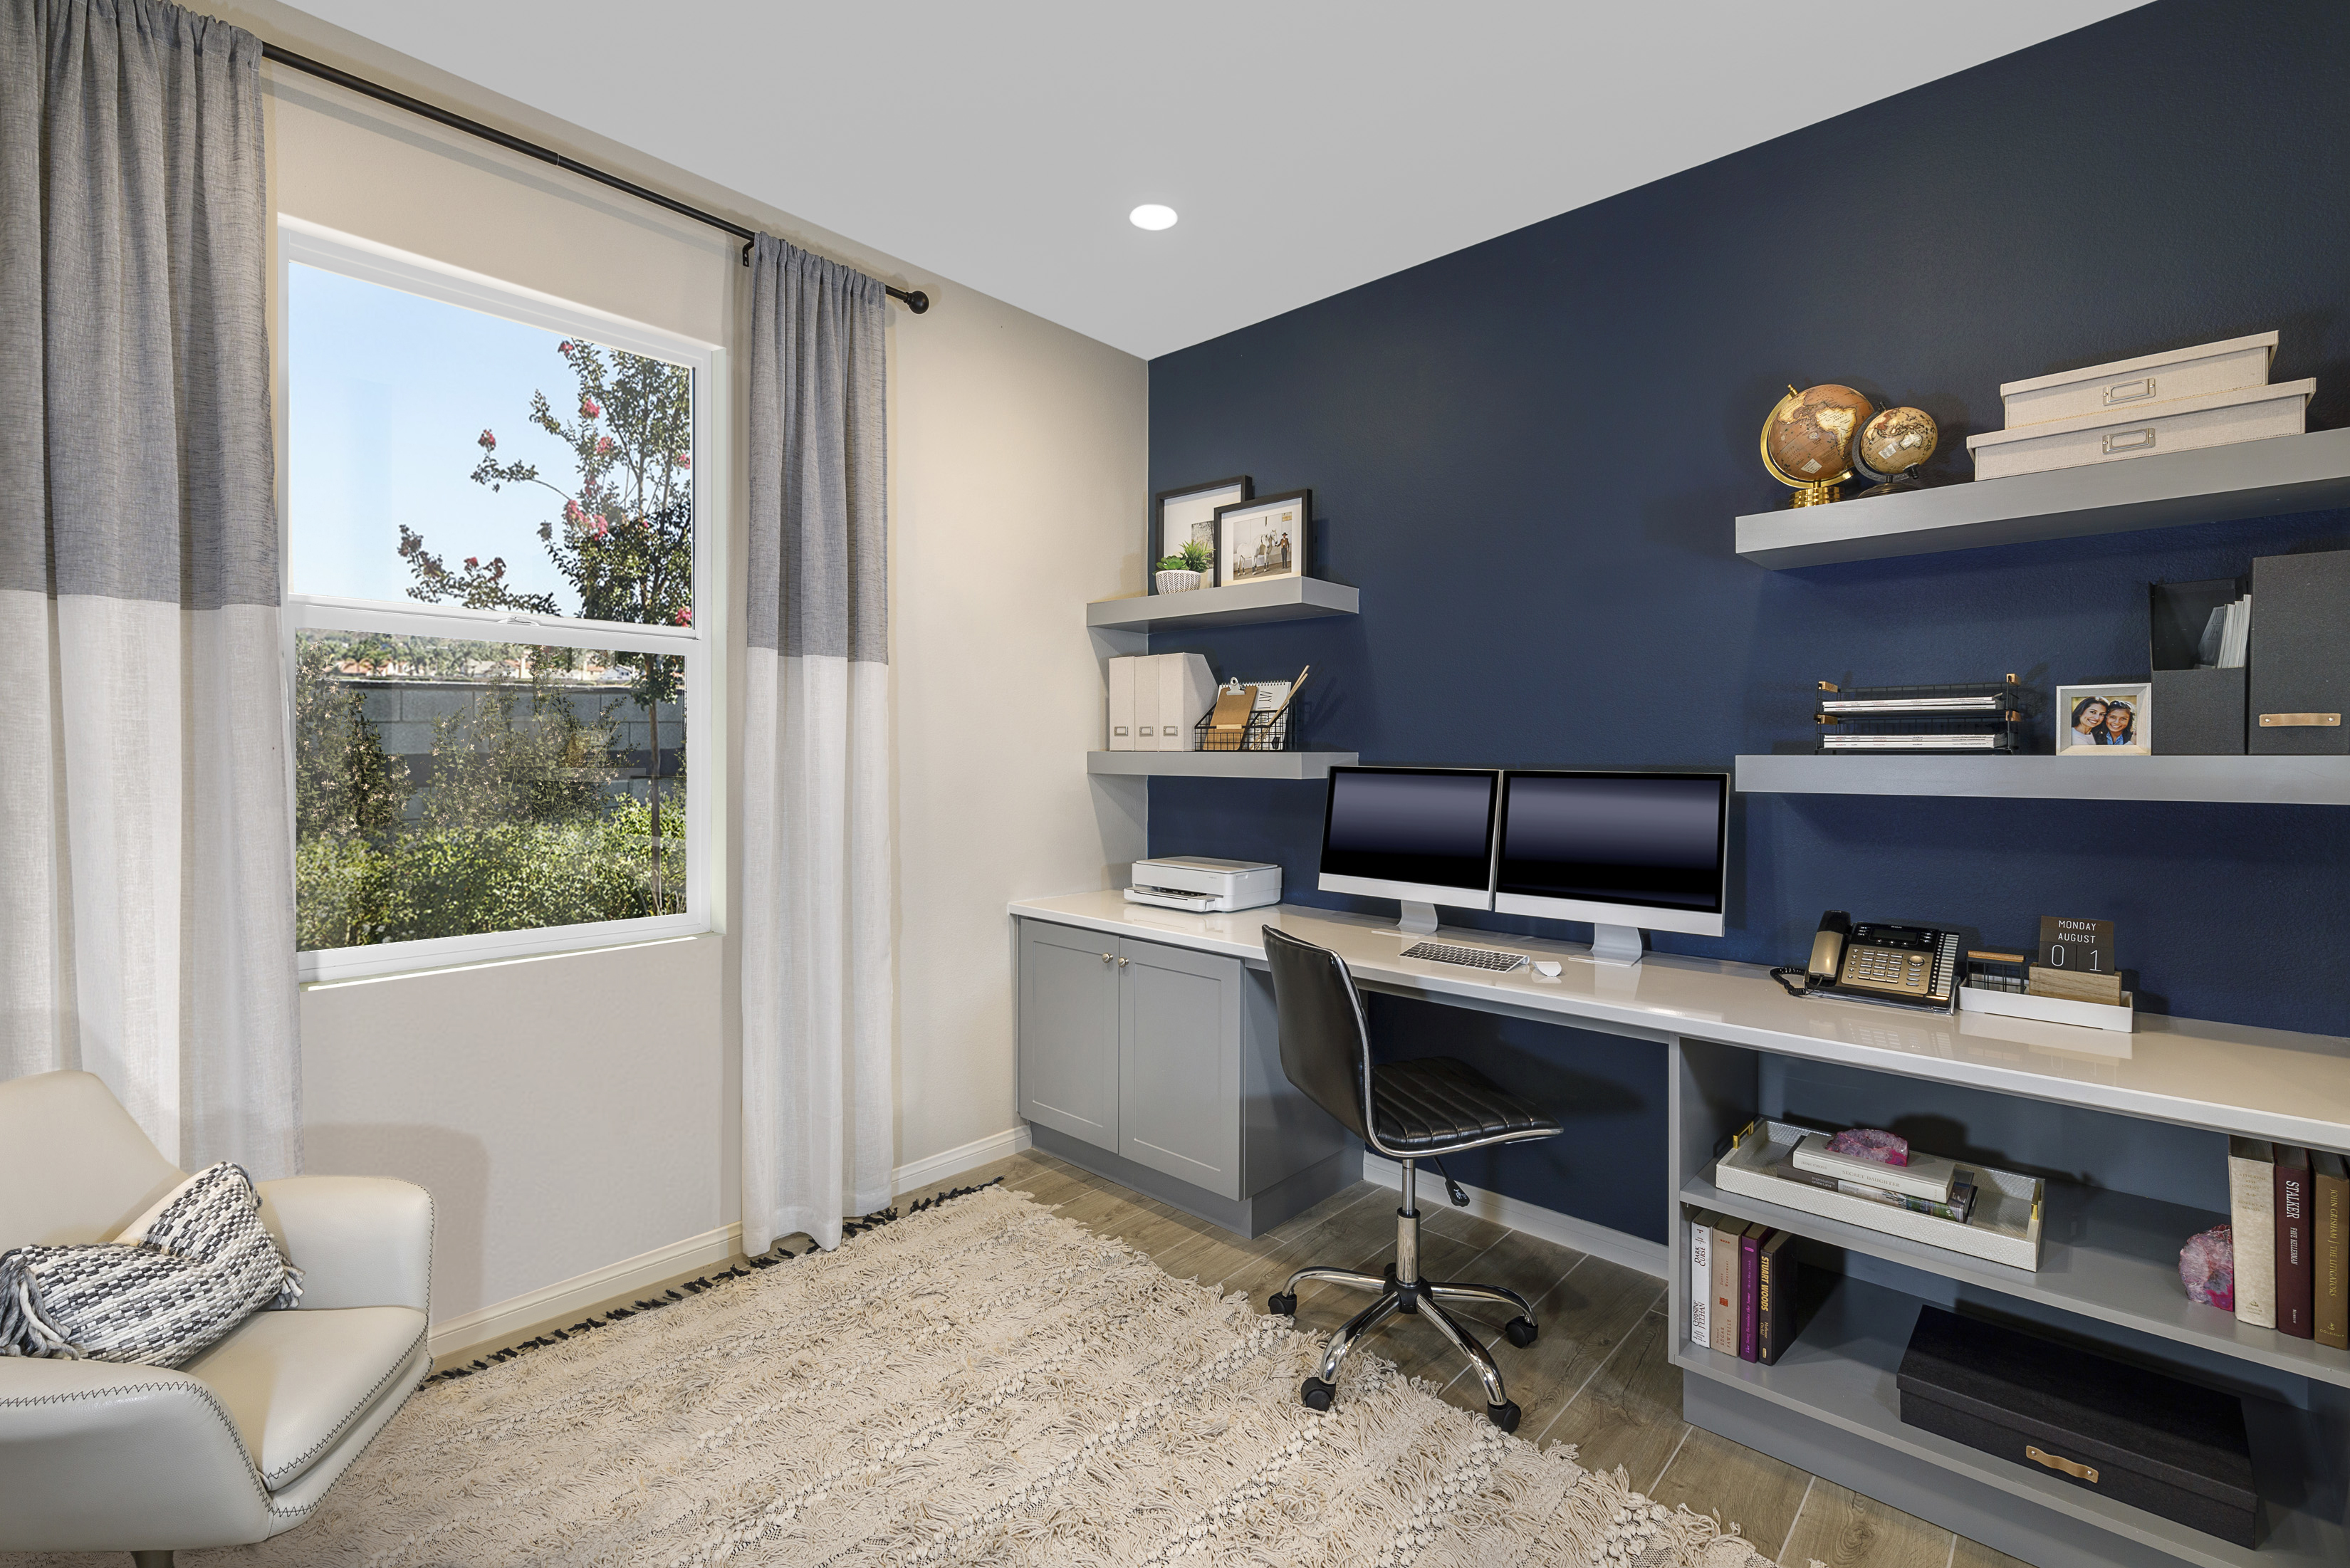 KB Home Debuts New Home Office Concept Designed to Meet the Needs of  Today's Homeowners | Business Wire